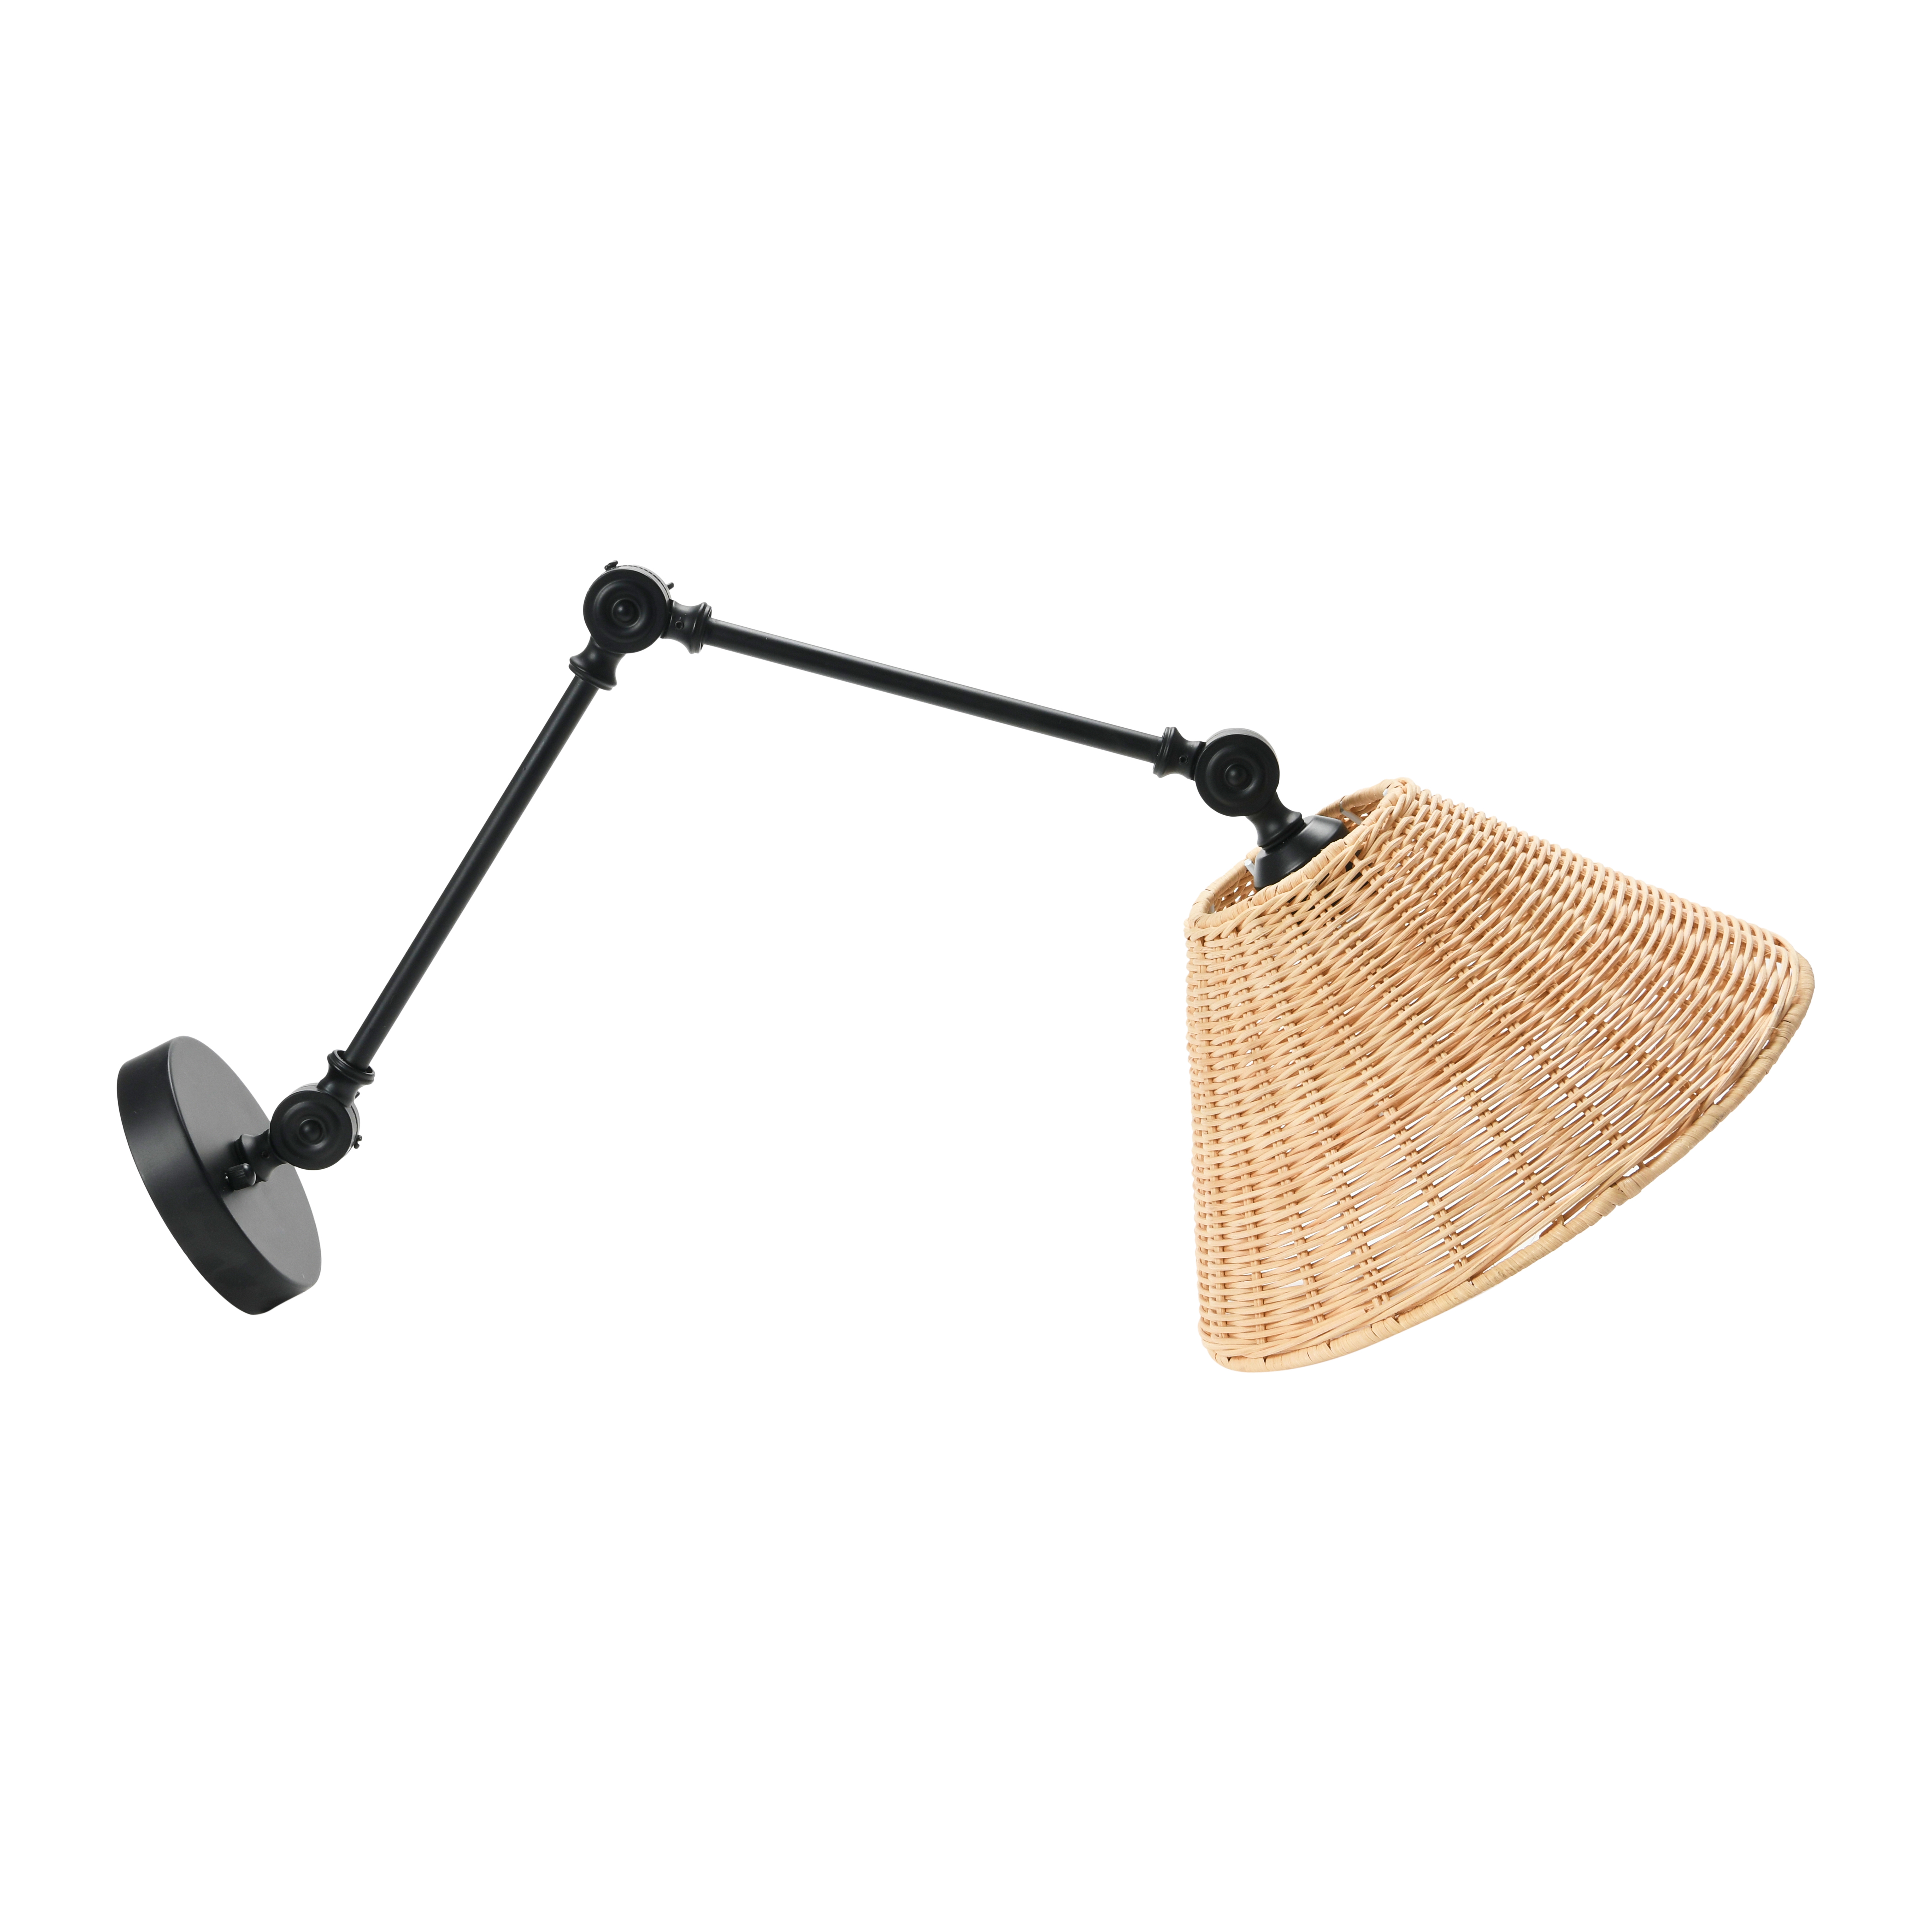 Coastal Adjustable Wall Sconce with Neutral Beige Rattan Shades, Black Metal Finish - Nomad Home